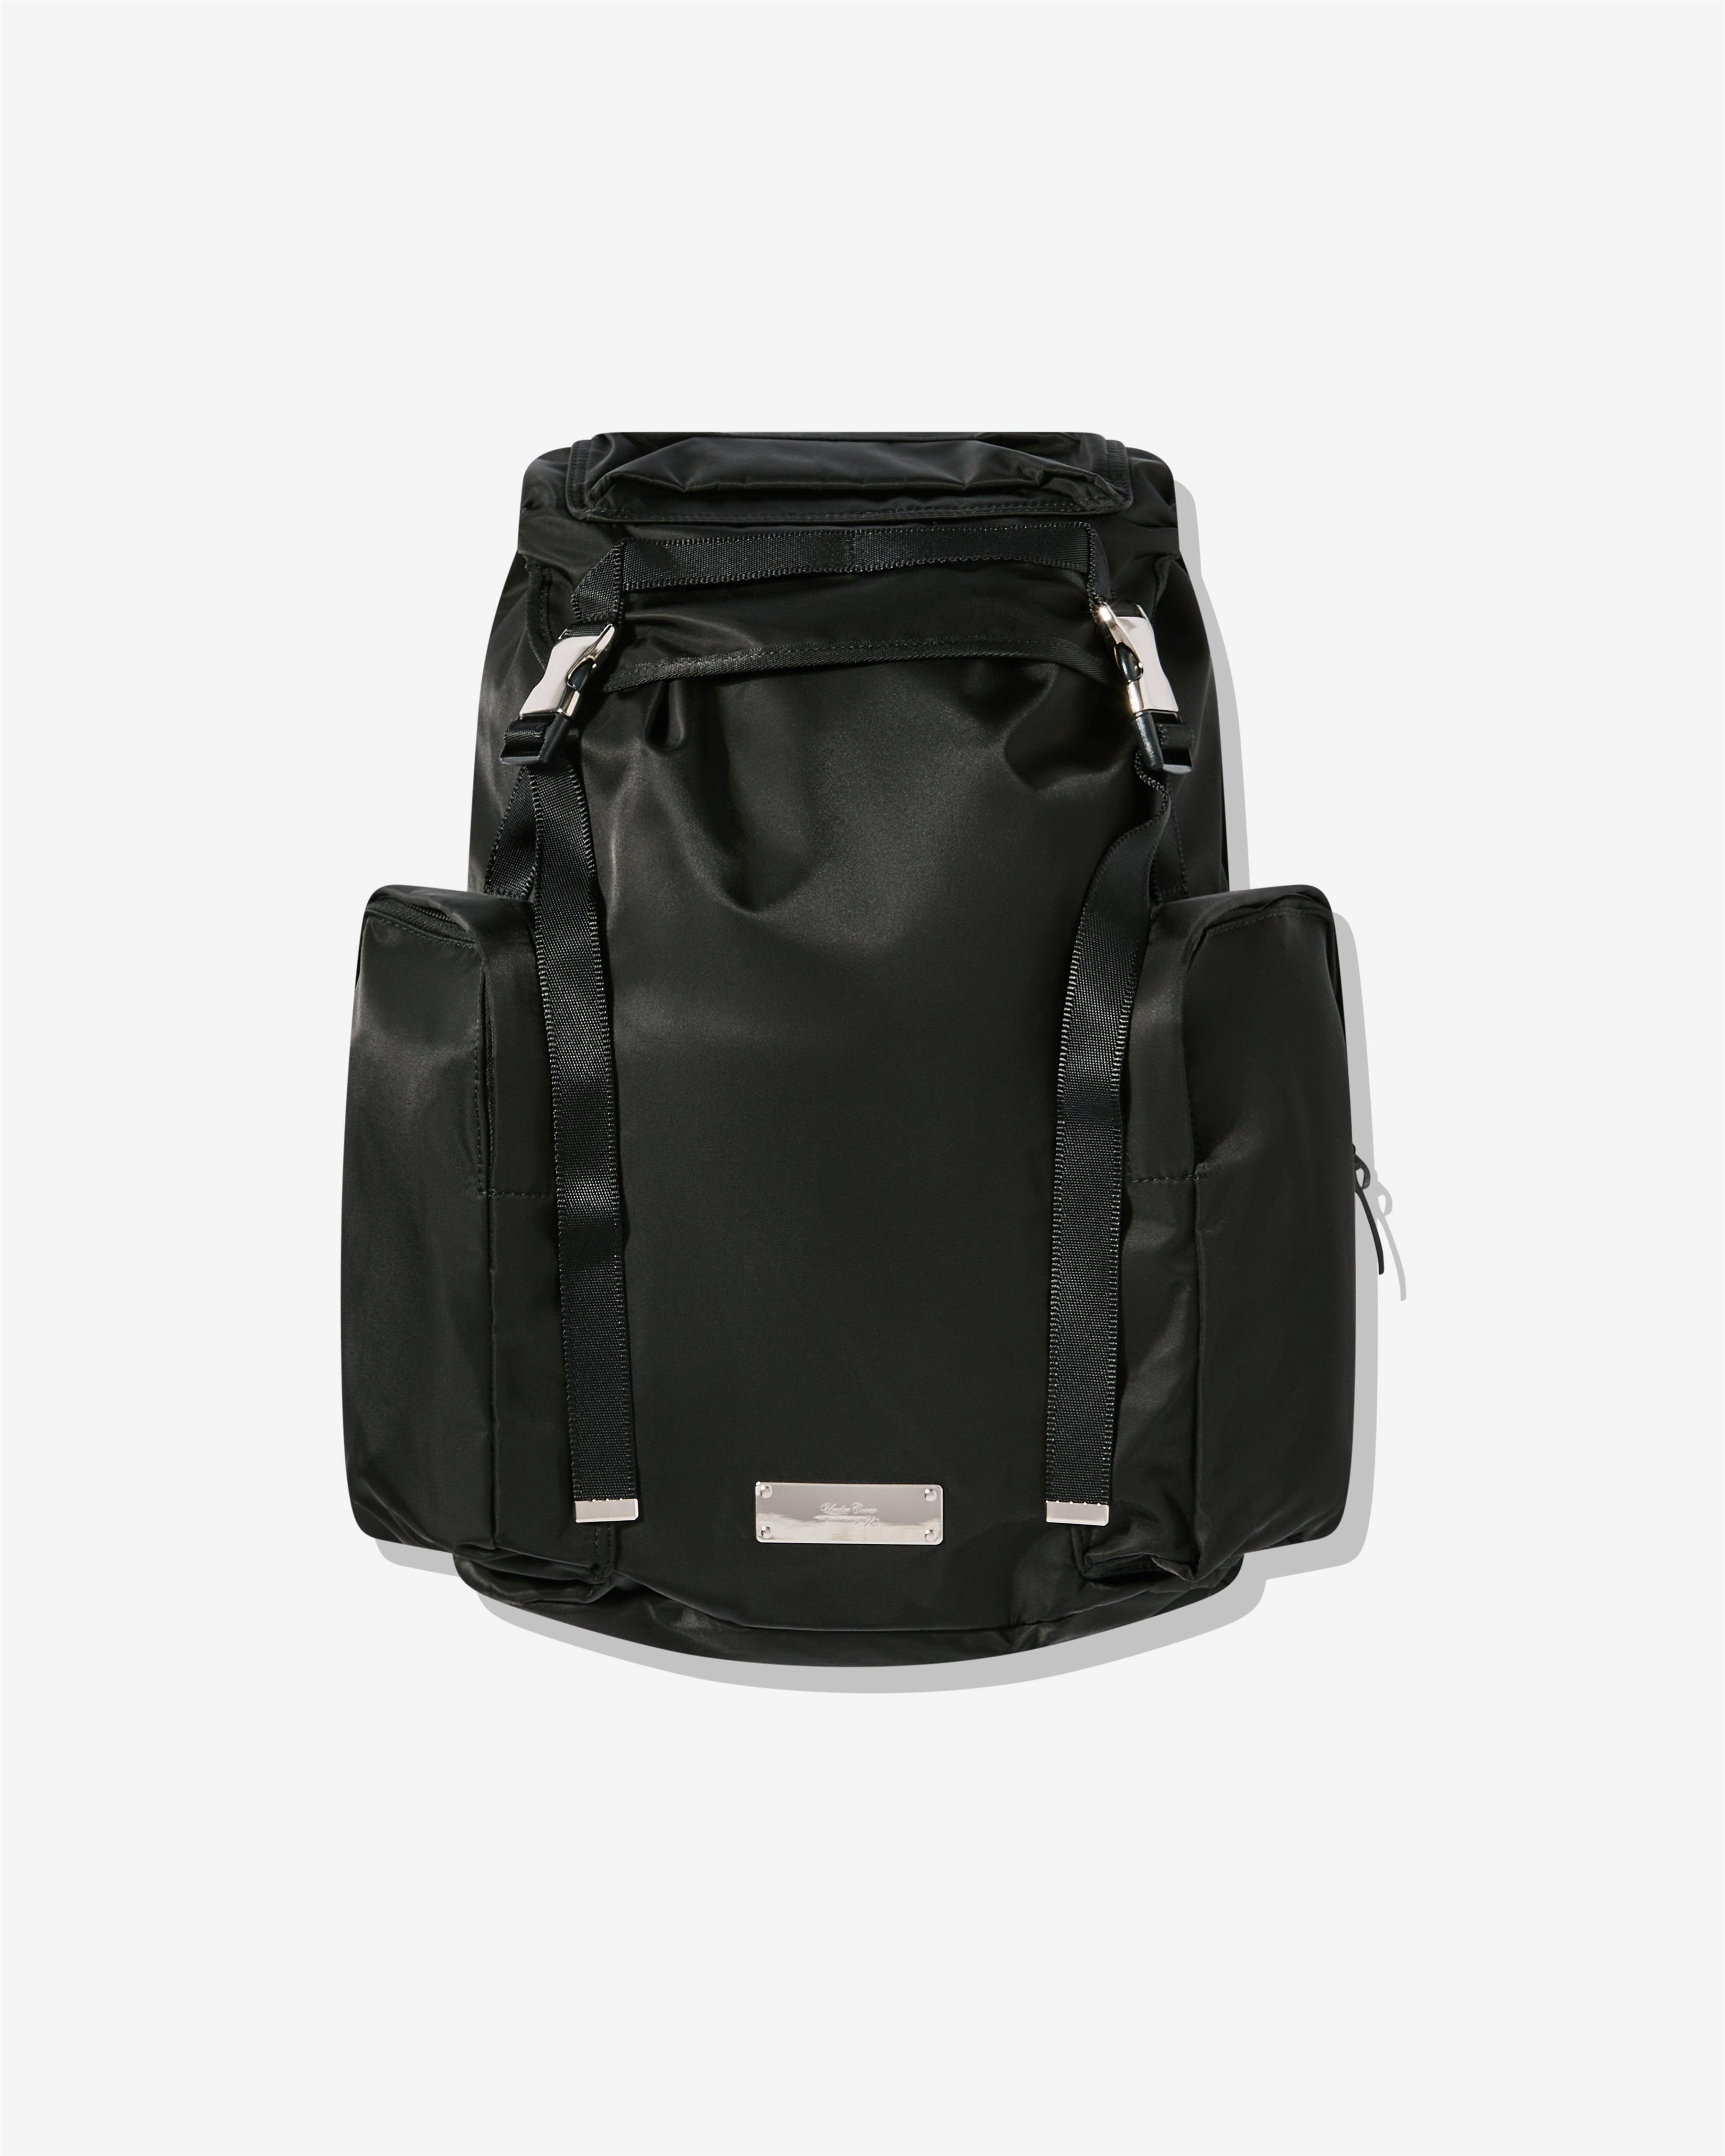 Undercover - Men's Backpack - (Black) by UNDERCOVER